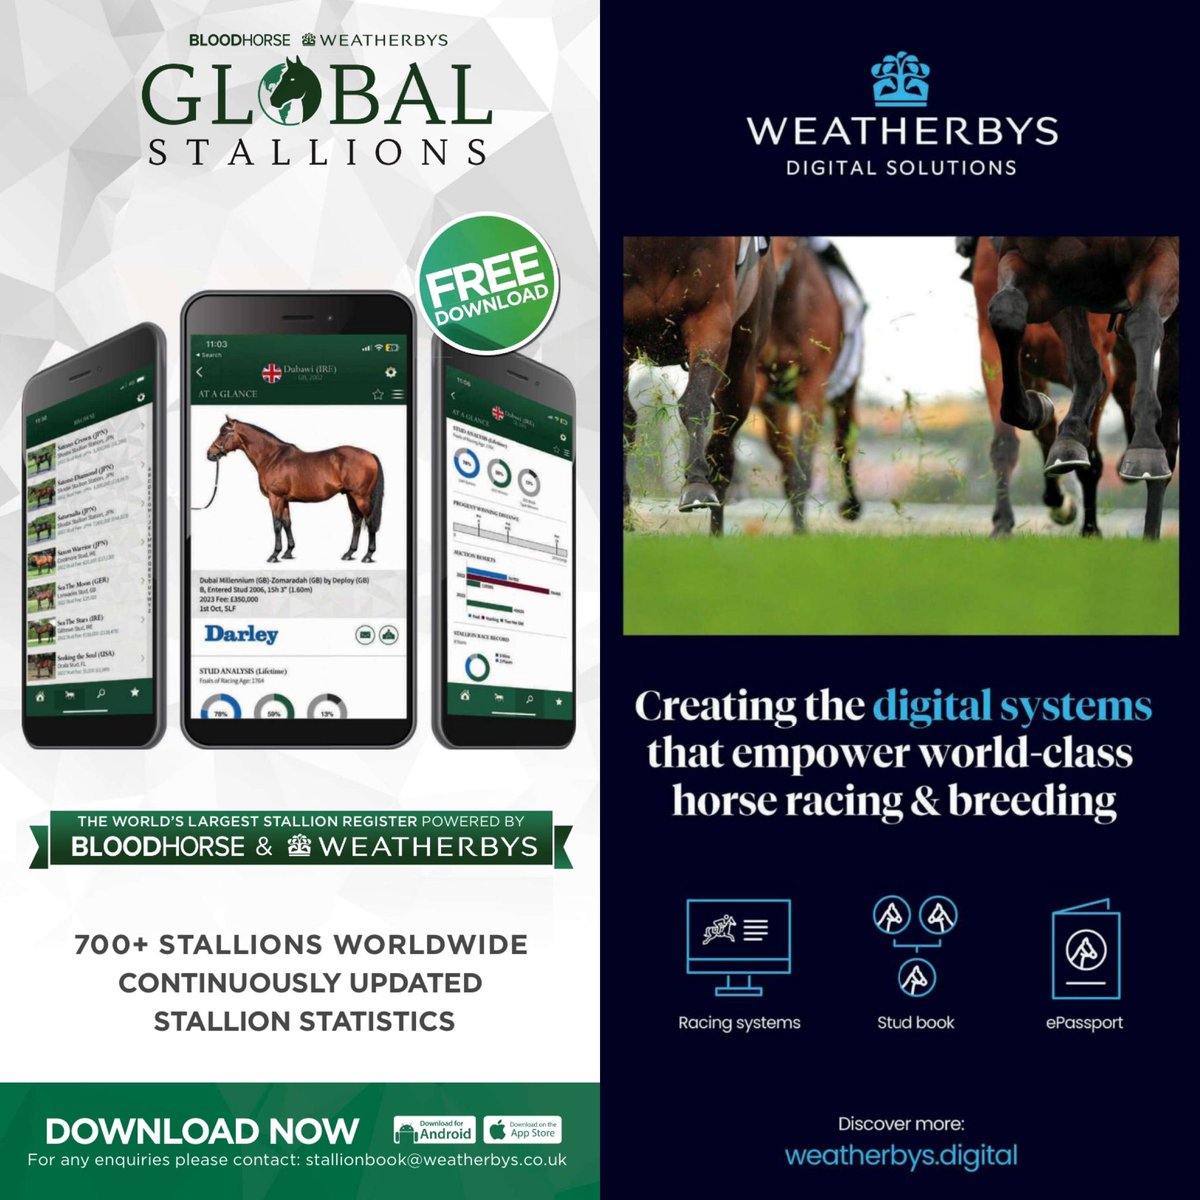 We’re really looking forward to sponsoring two races @EpsomRacecourse’s Spring Meeting today. The Weatherbys Global Stallions App Great Metropolitan Handicap - a race with such history - and the Weatherbys Digital Solutions Novice Stakes. The very best of luck to all.